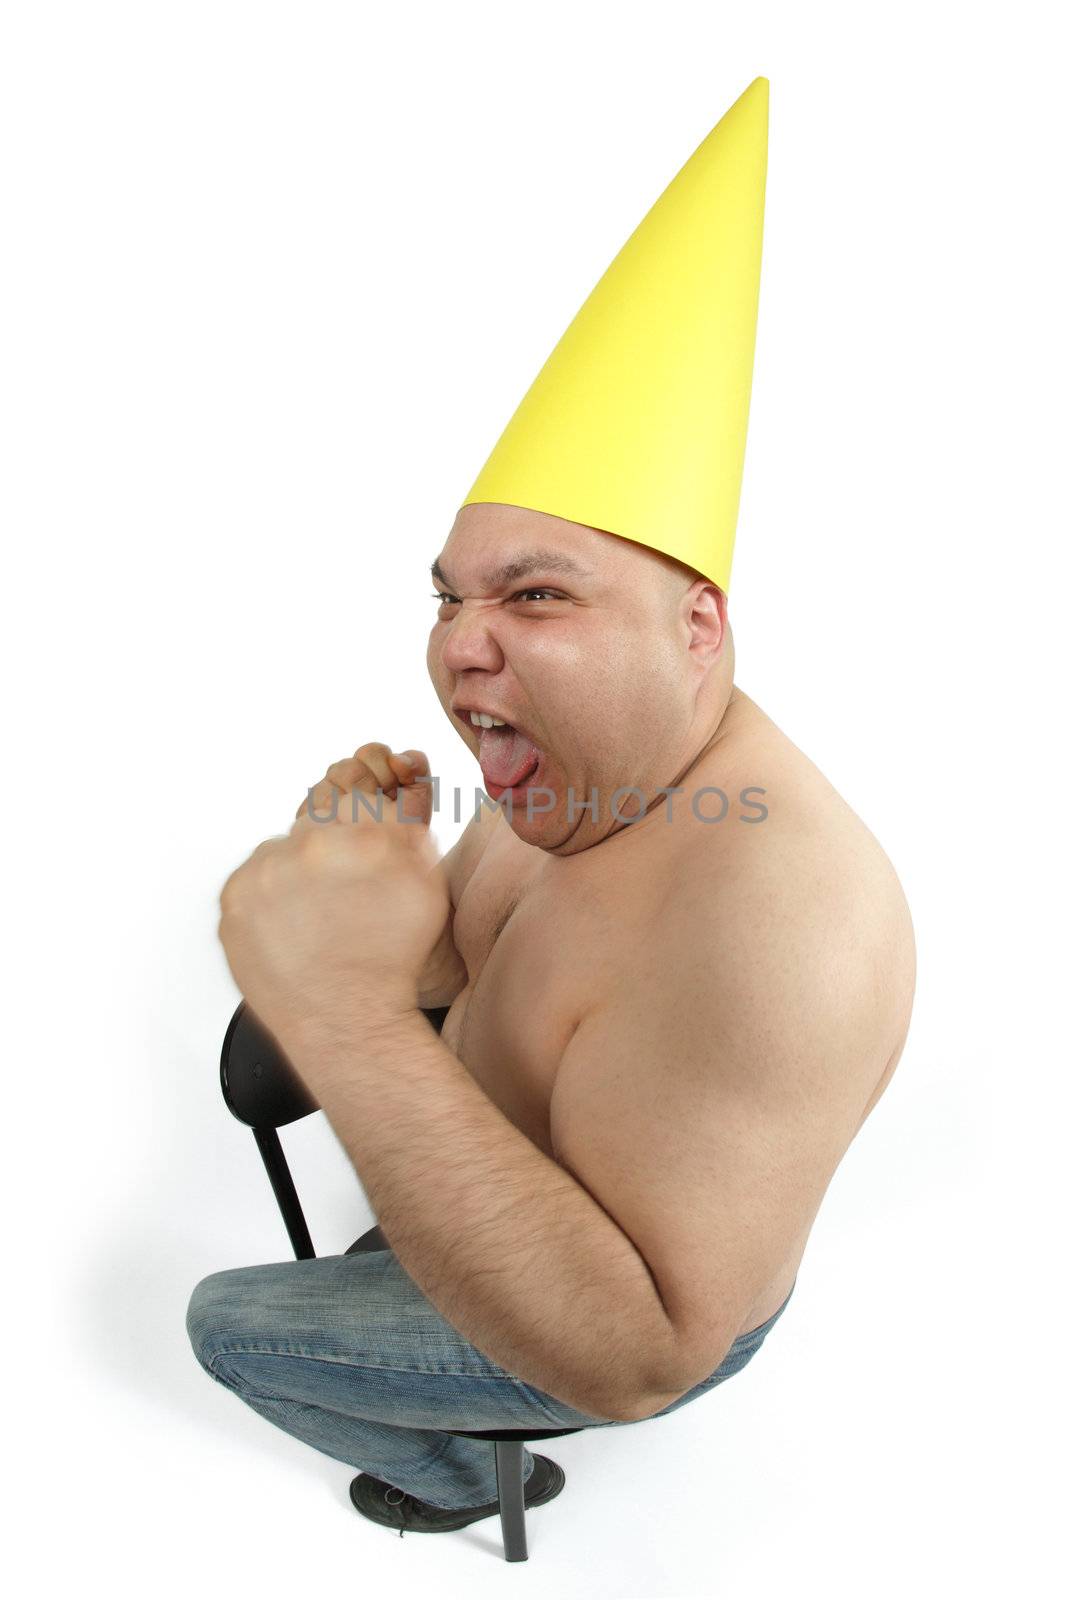 Fool sitting in the corner wearing a dunce cap freaking out.
